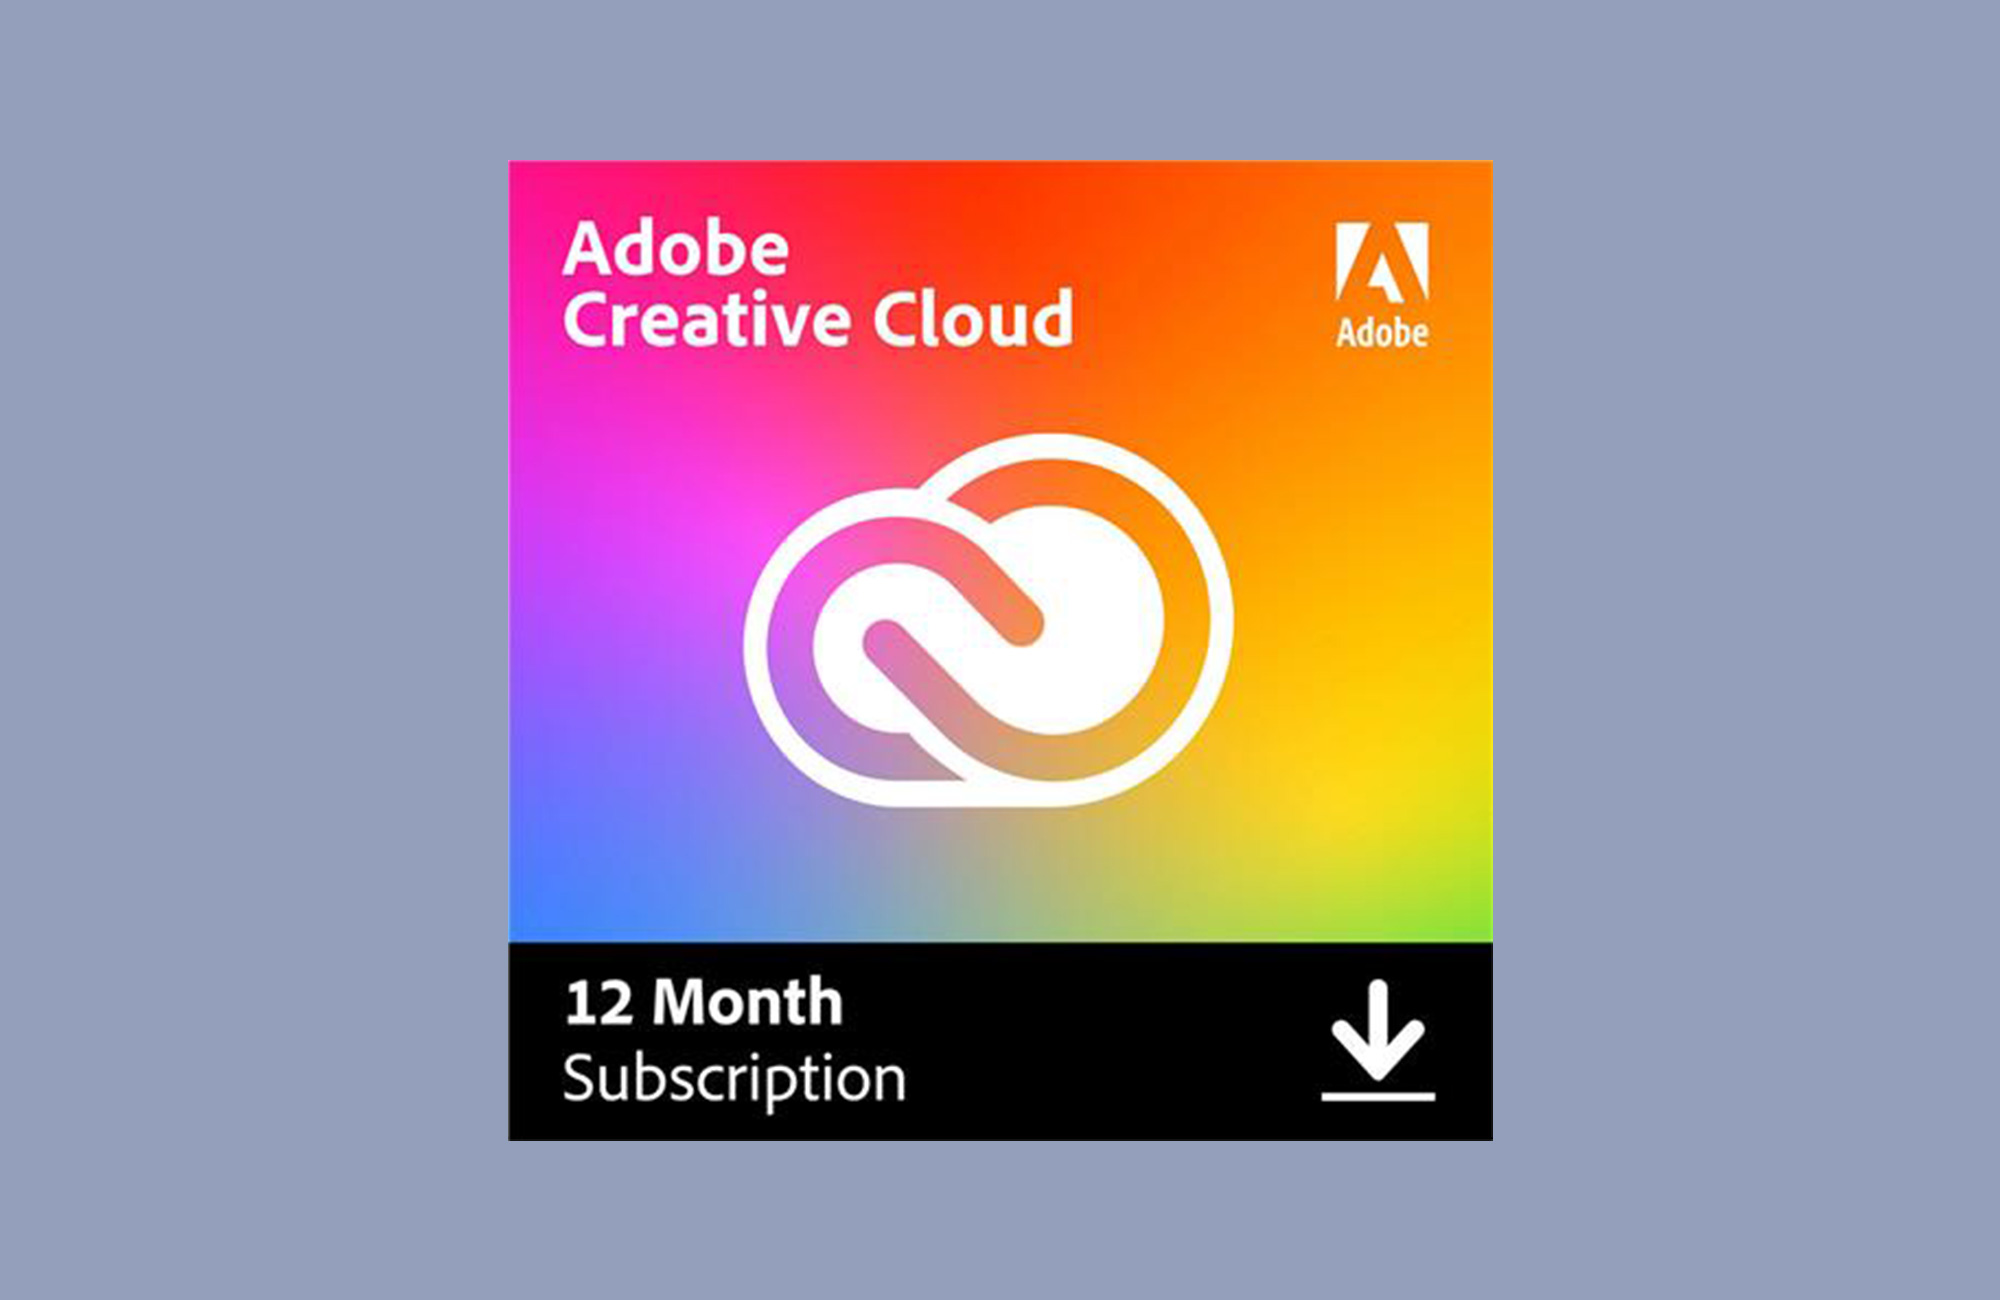 Adobe Creative Cloud early Black Friday deal | Popular Photography